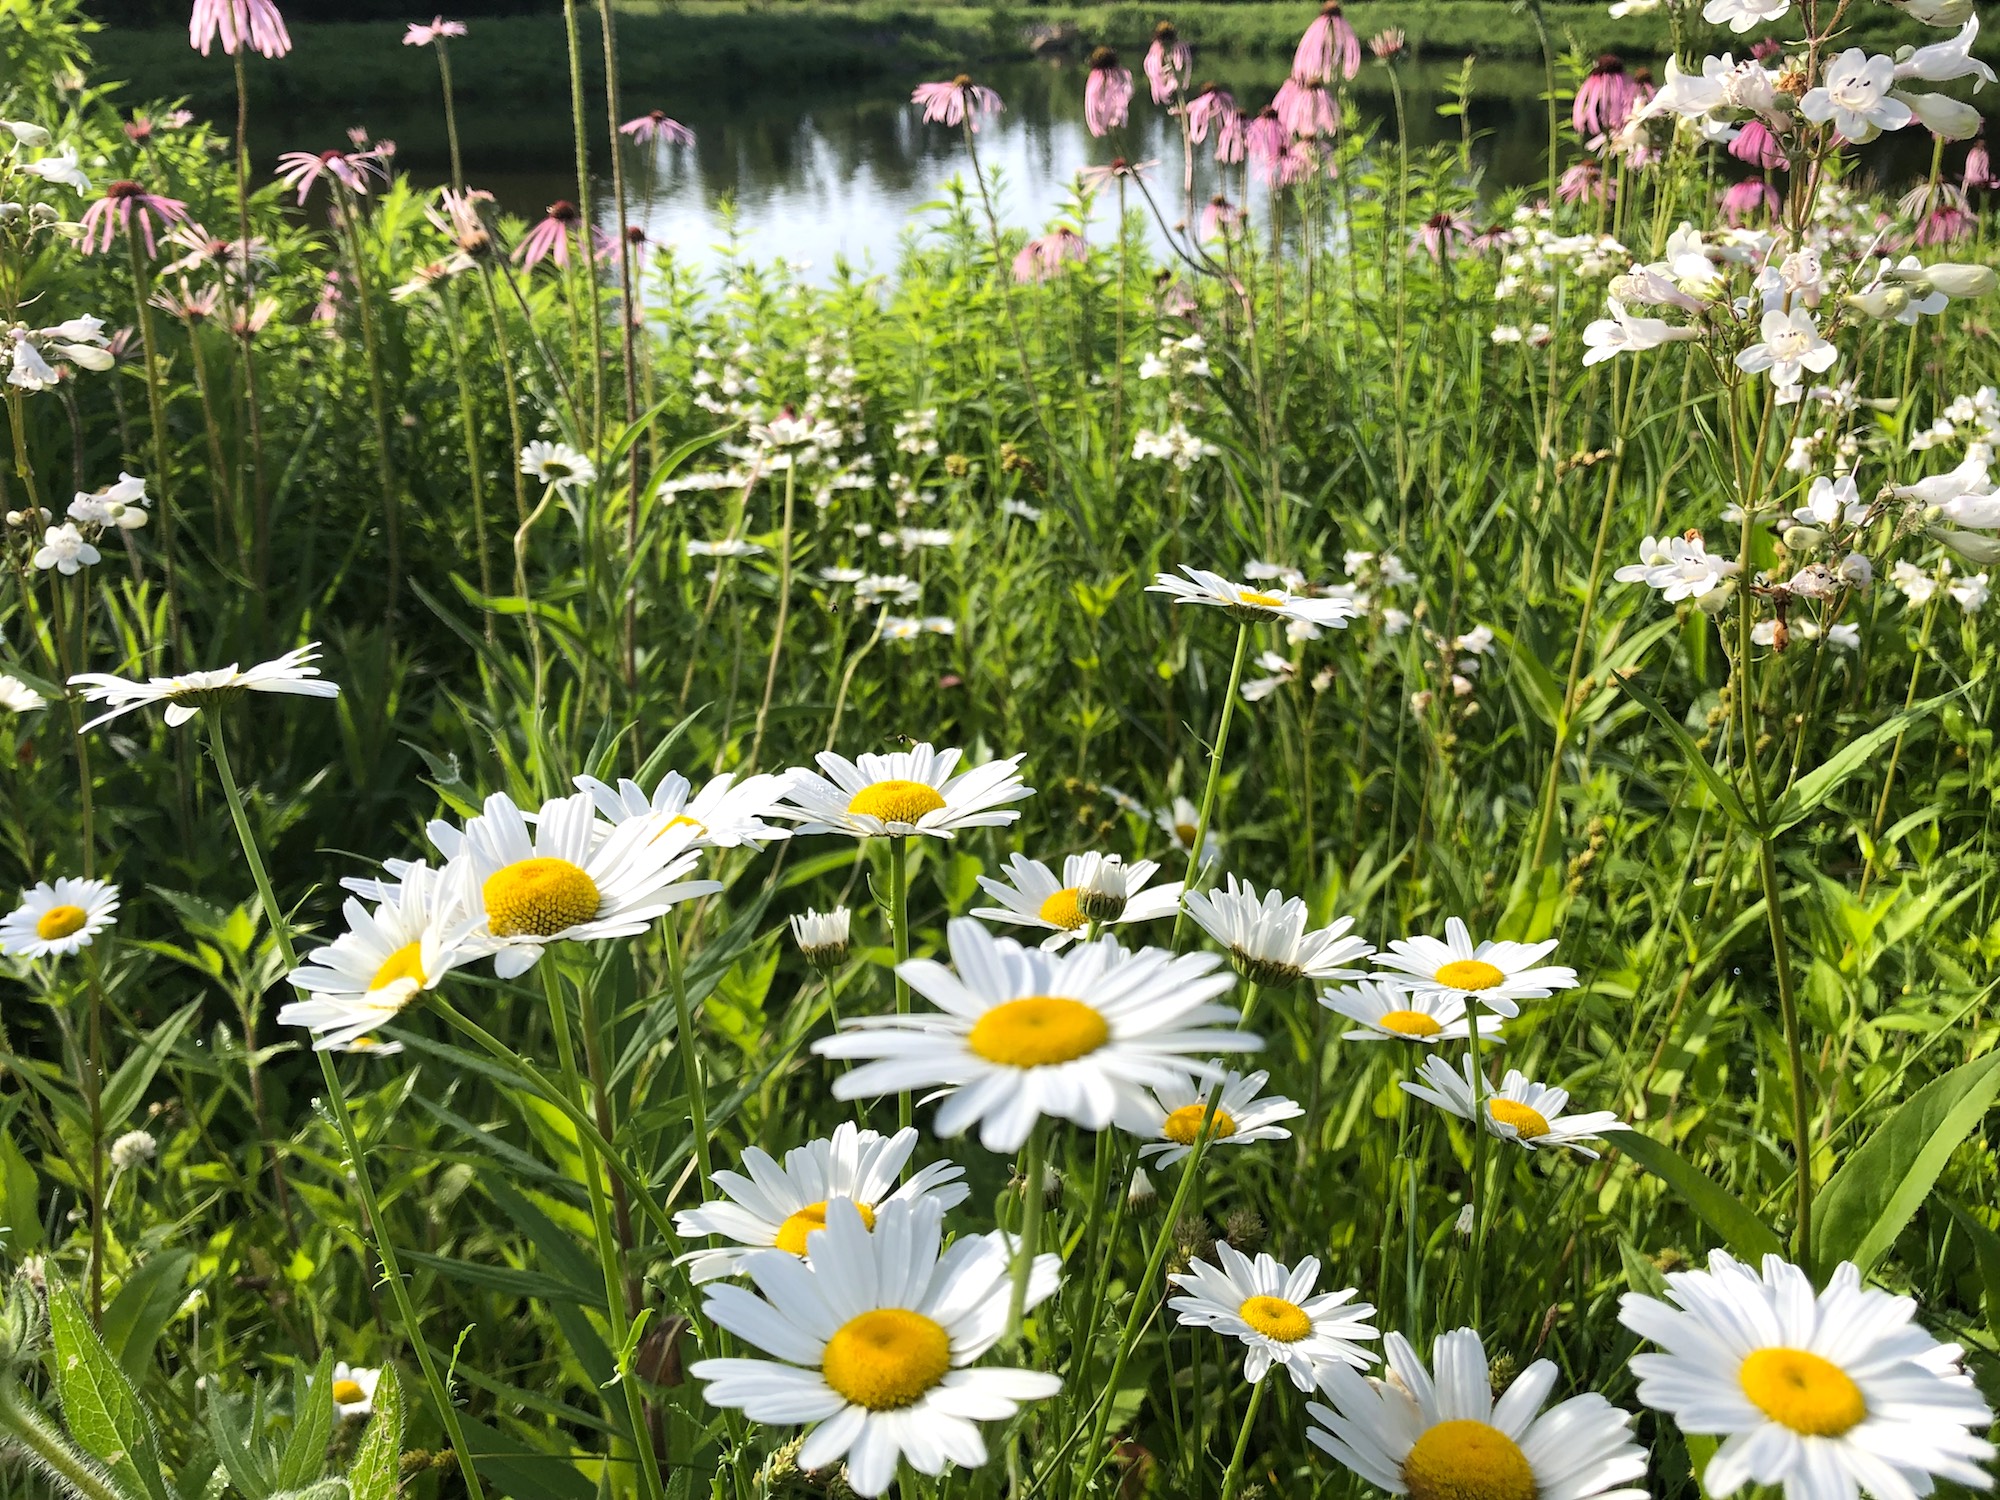 Ox-eye Daisies on bank of retaining pond at the corner of Manitou Way and Nakoma Road in Madison, Wisconsin on June 26, 2019.